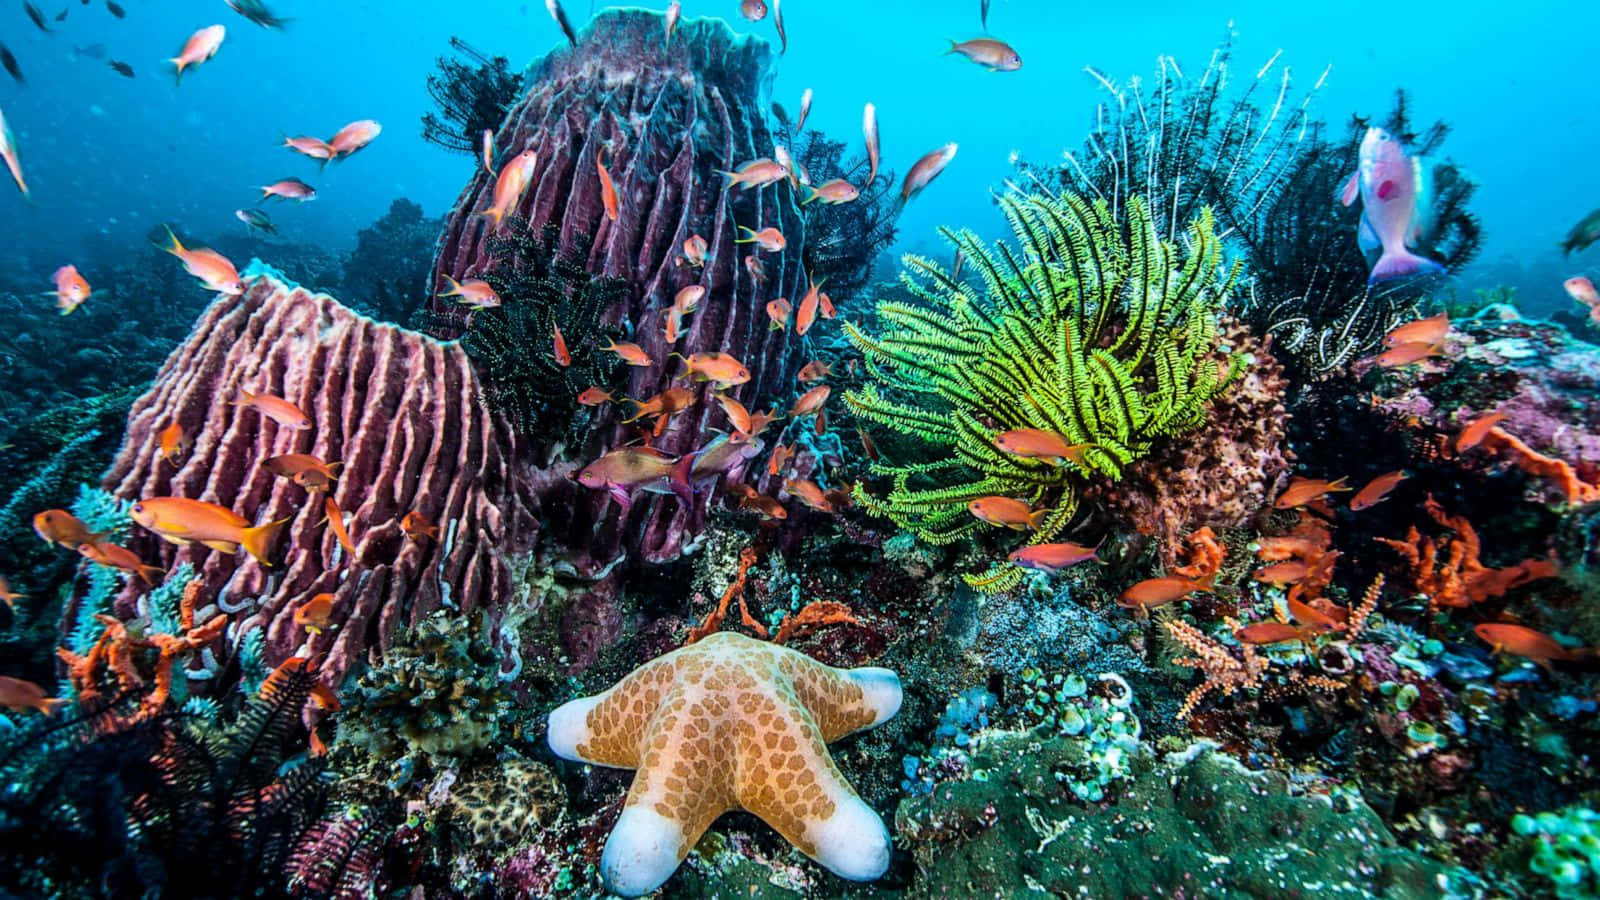 Coral Reef Starfish Underwater Sea Life Picture